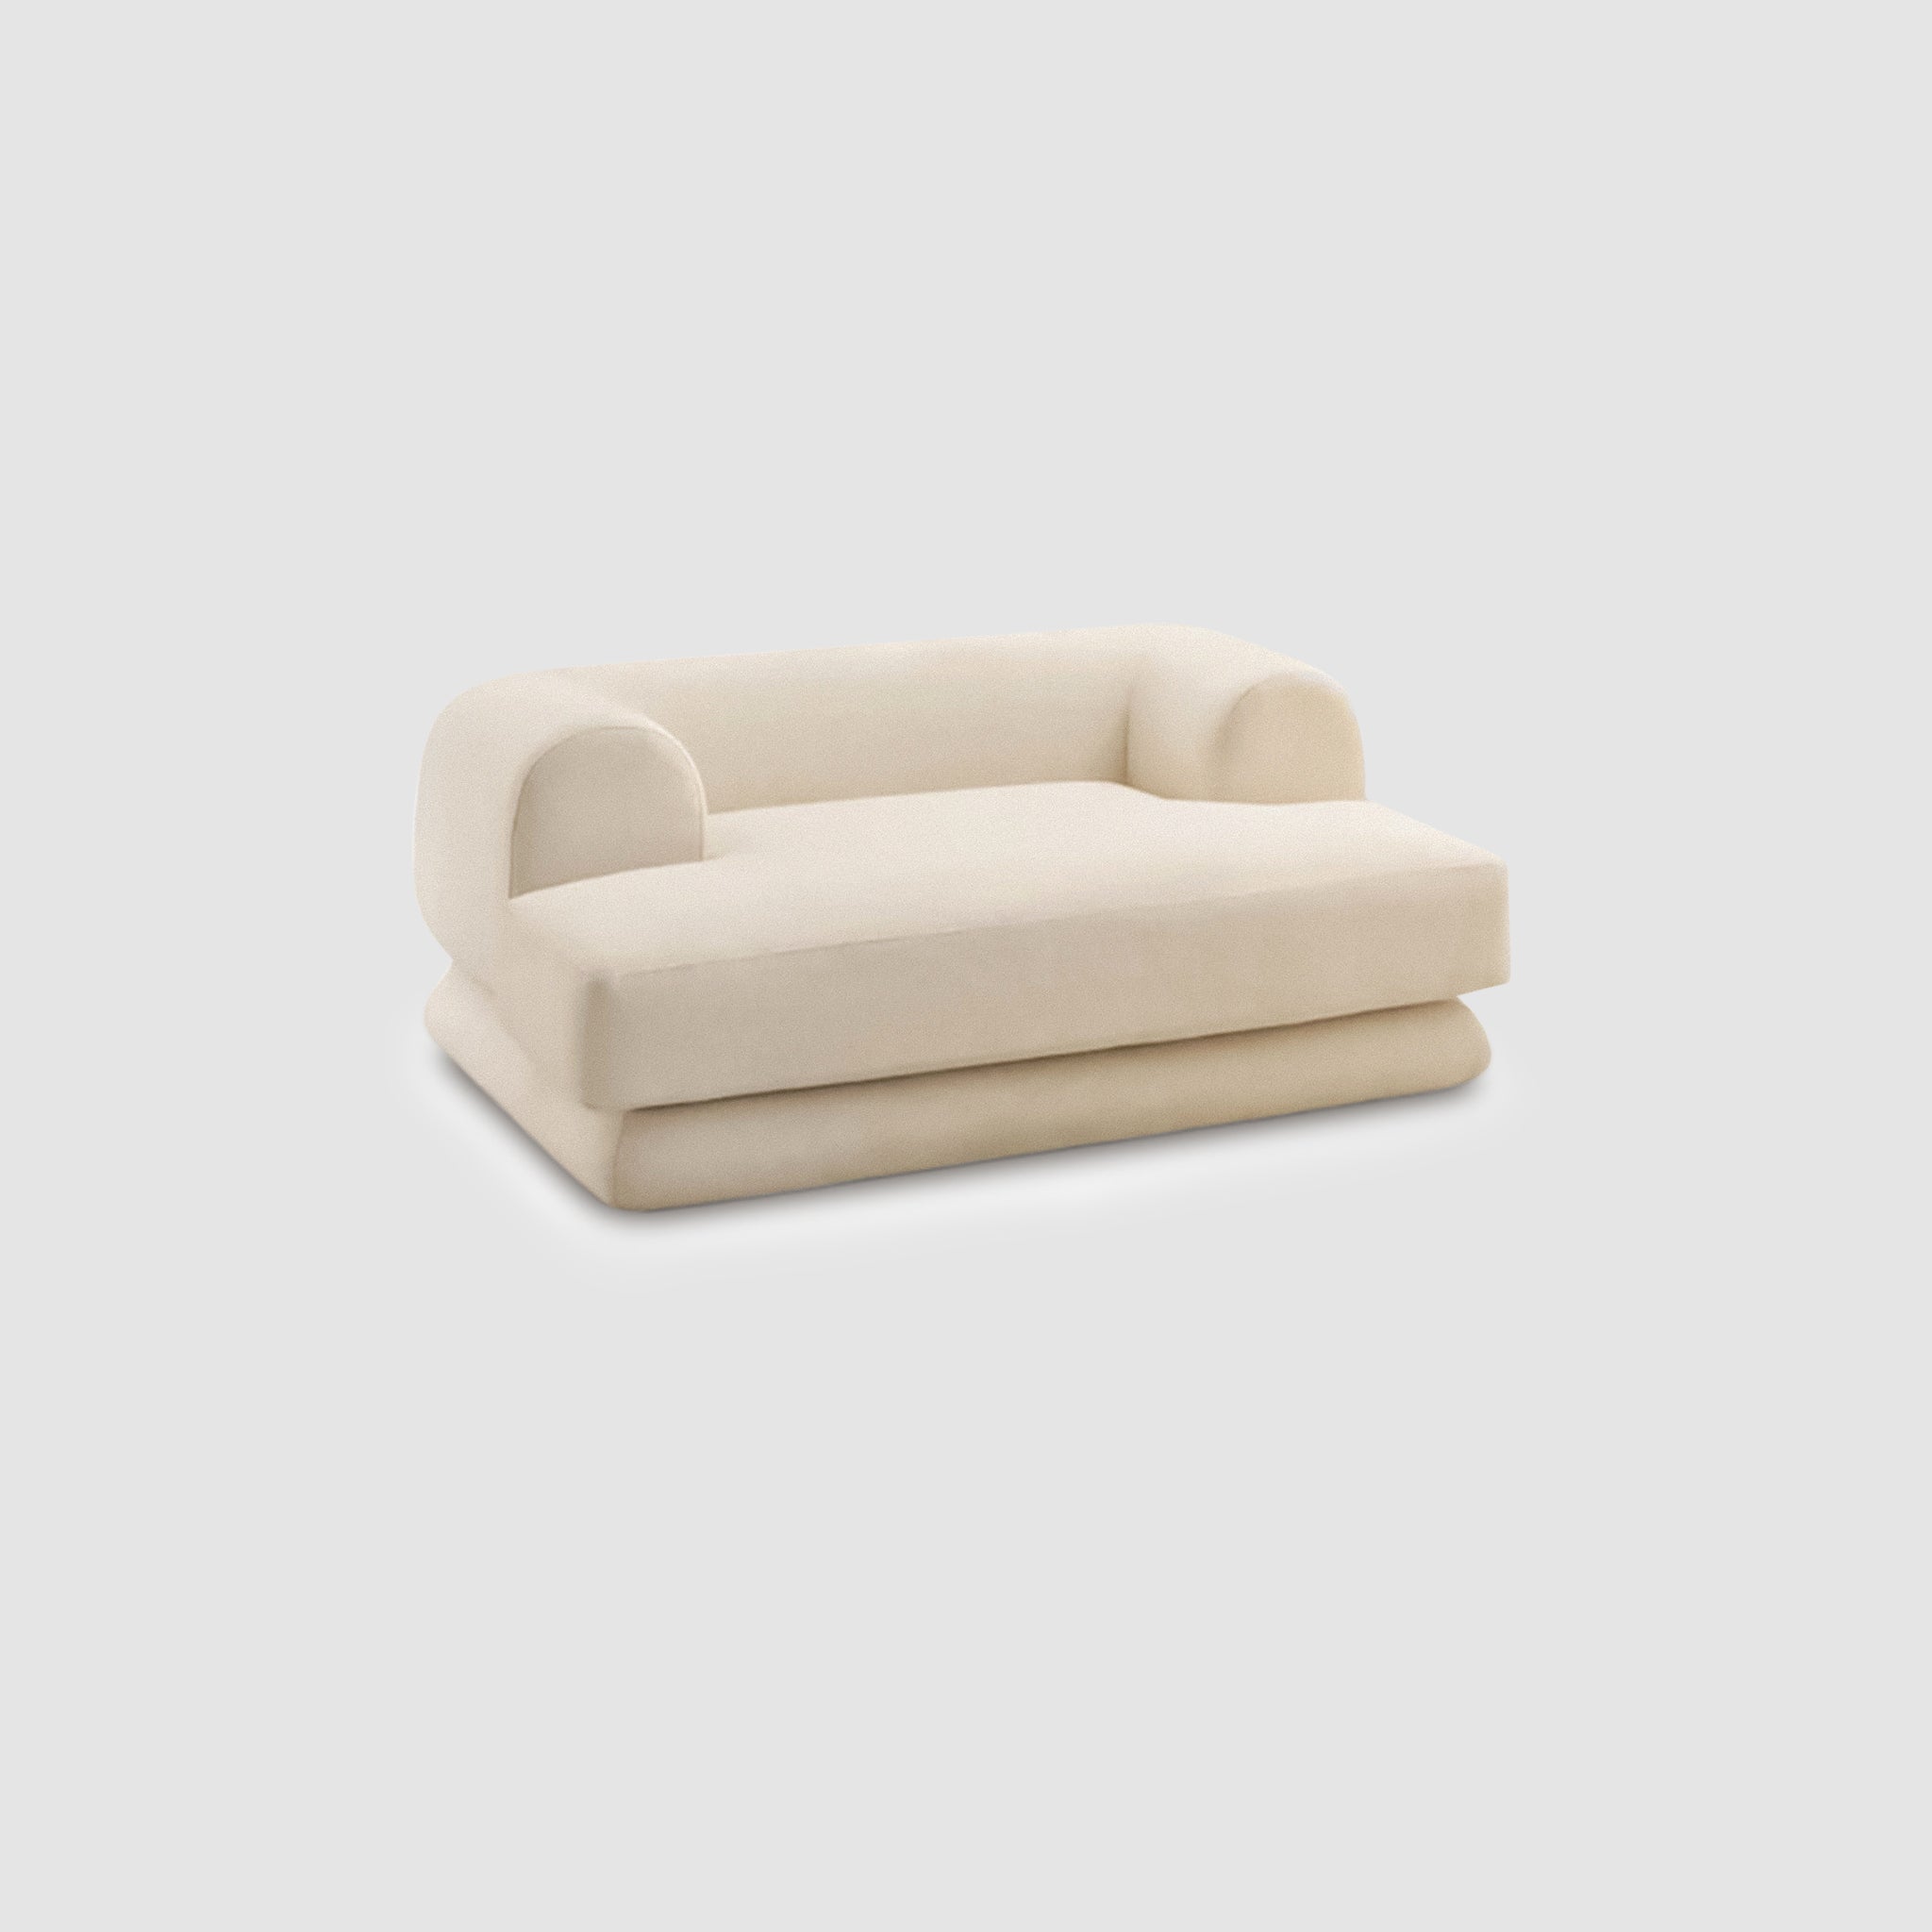 "Angled view of The Lewis Low Lounger Accent Chair featuring plush beige upholstery, low-profile design, and rounded armrests, set against a plain background."